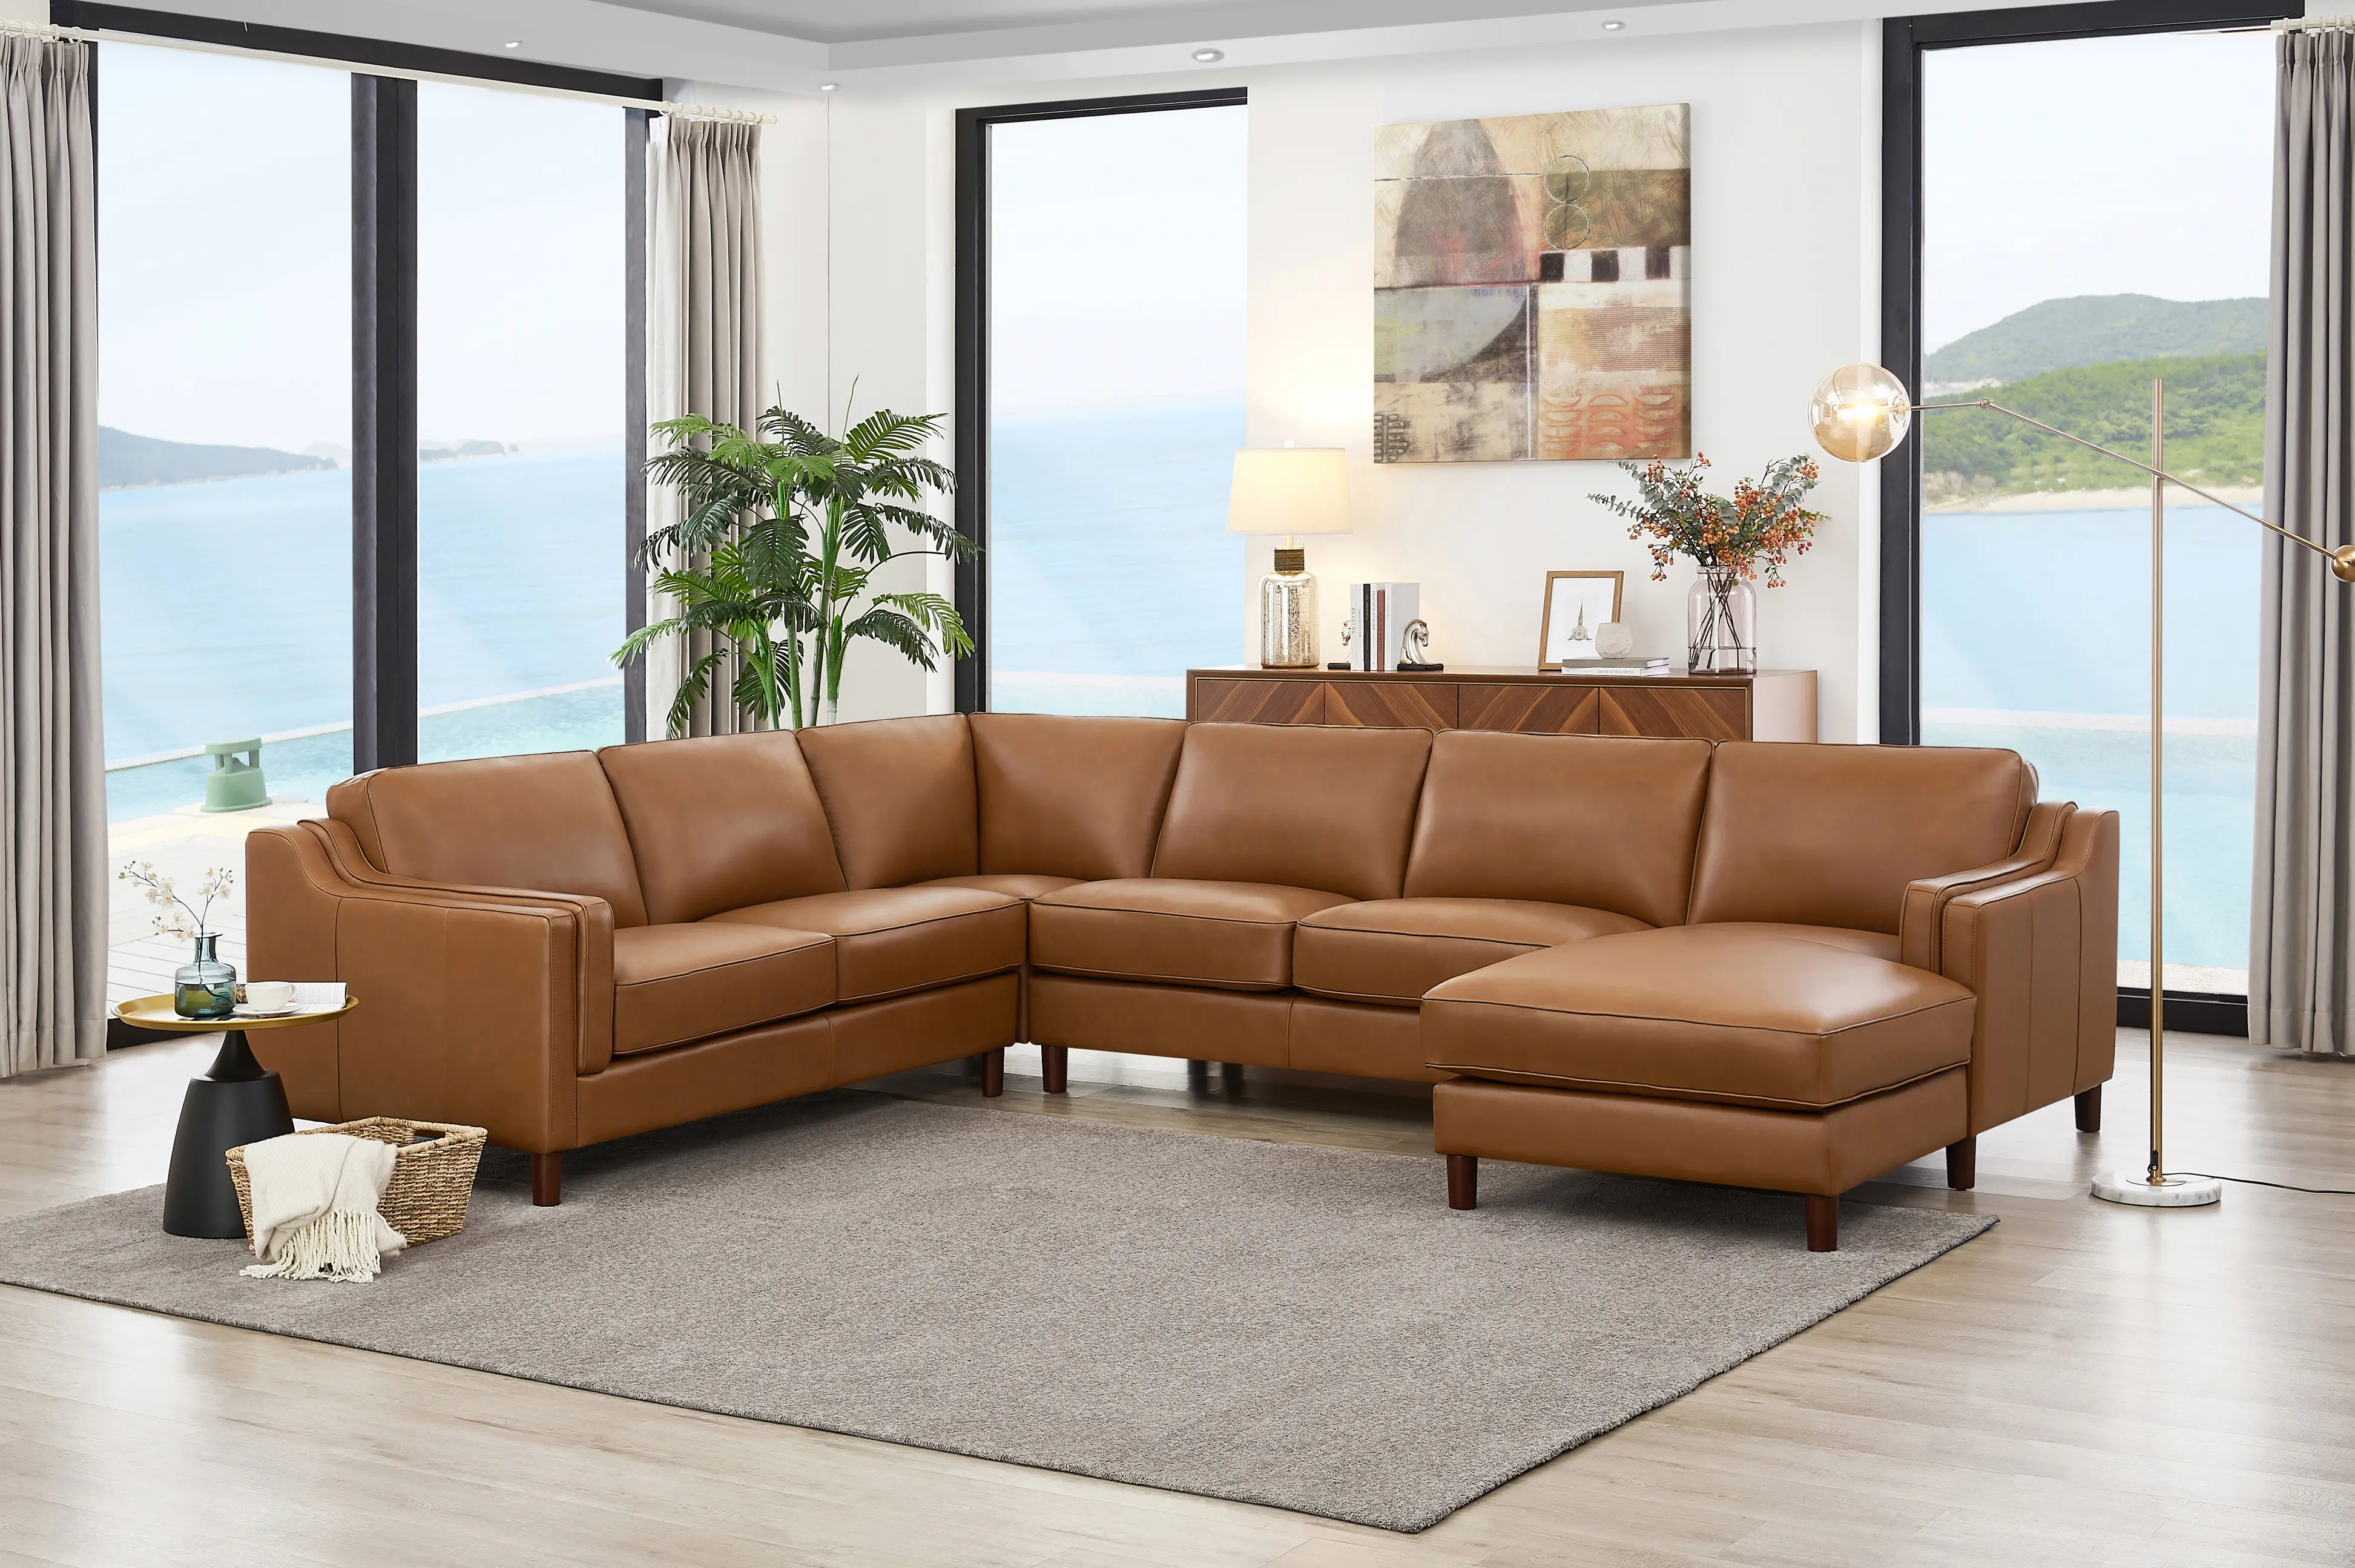 6932-SECT4-RHFCH-2523 Ballari Cognac Brown Leather 4 Piece Sectional wit sku 6932-SECT4-RHFCH-2523